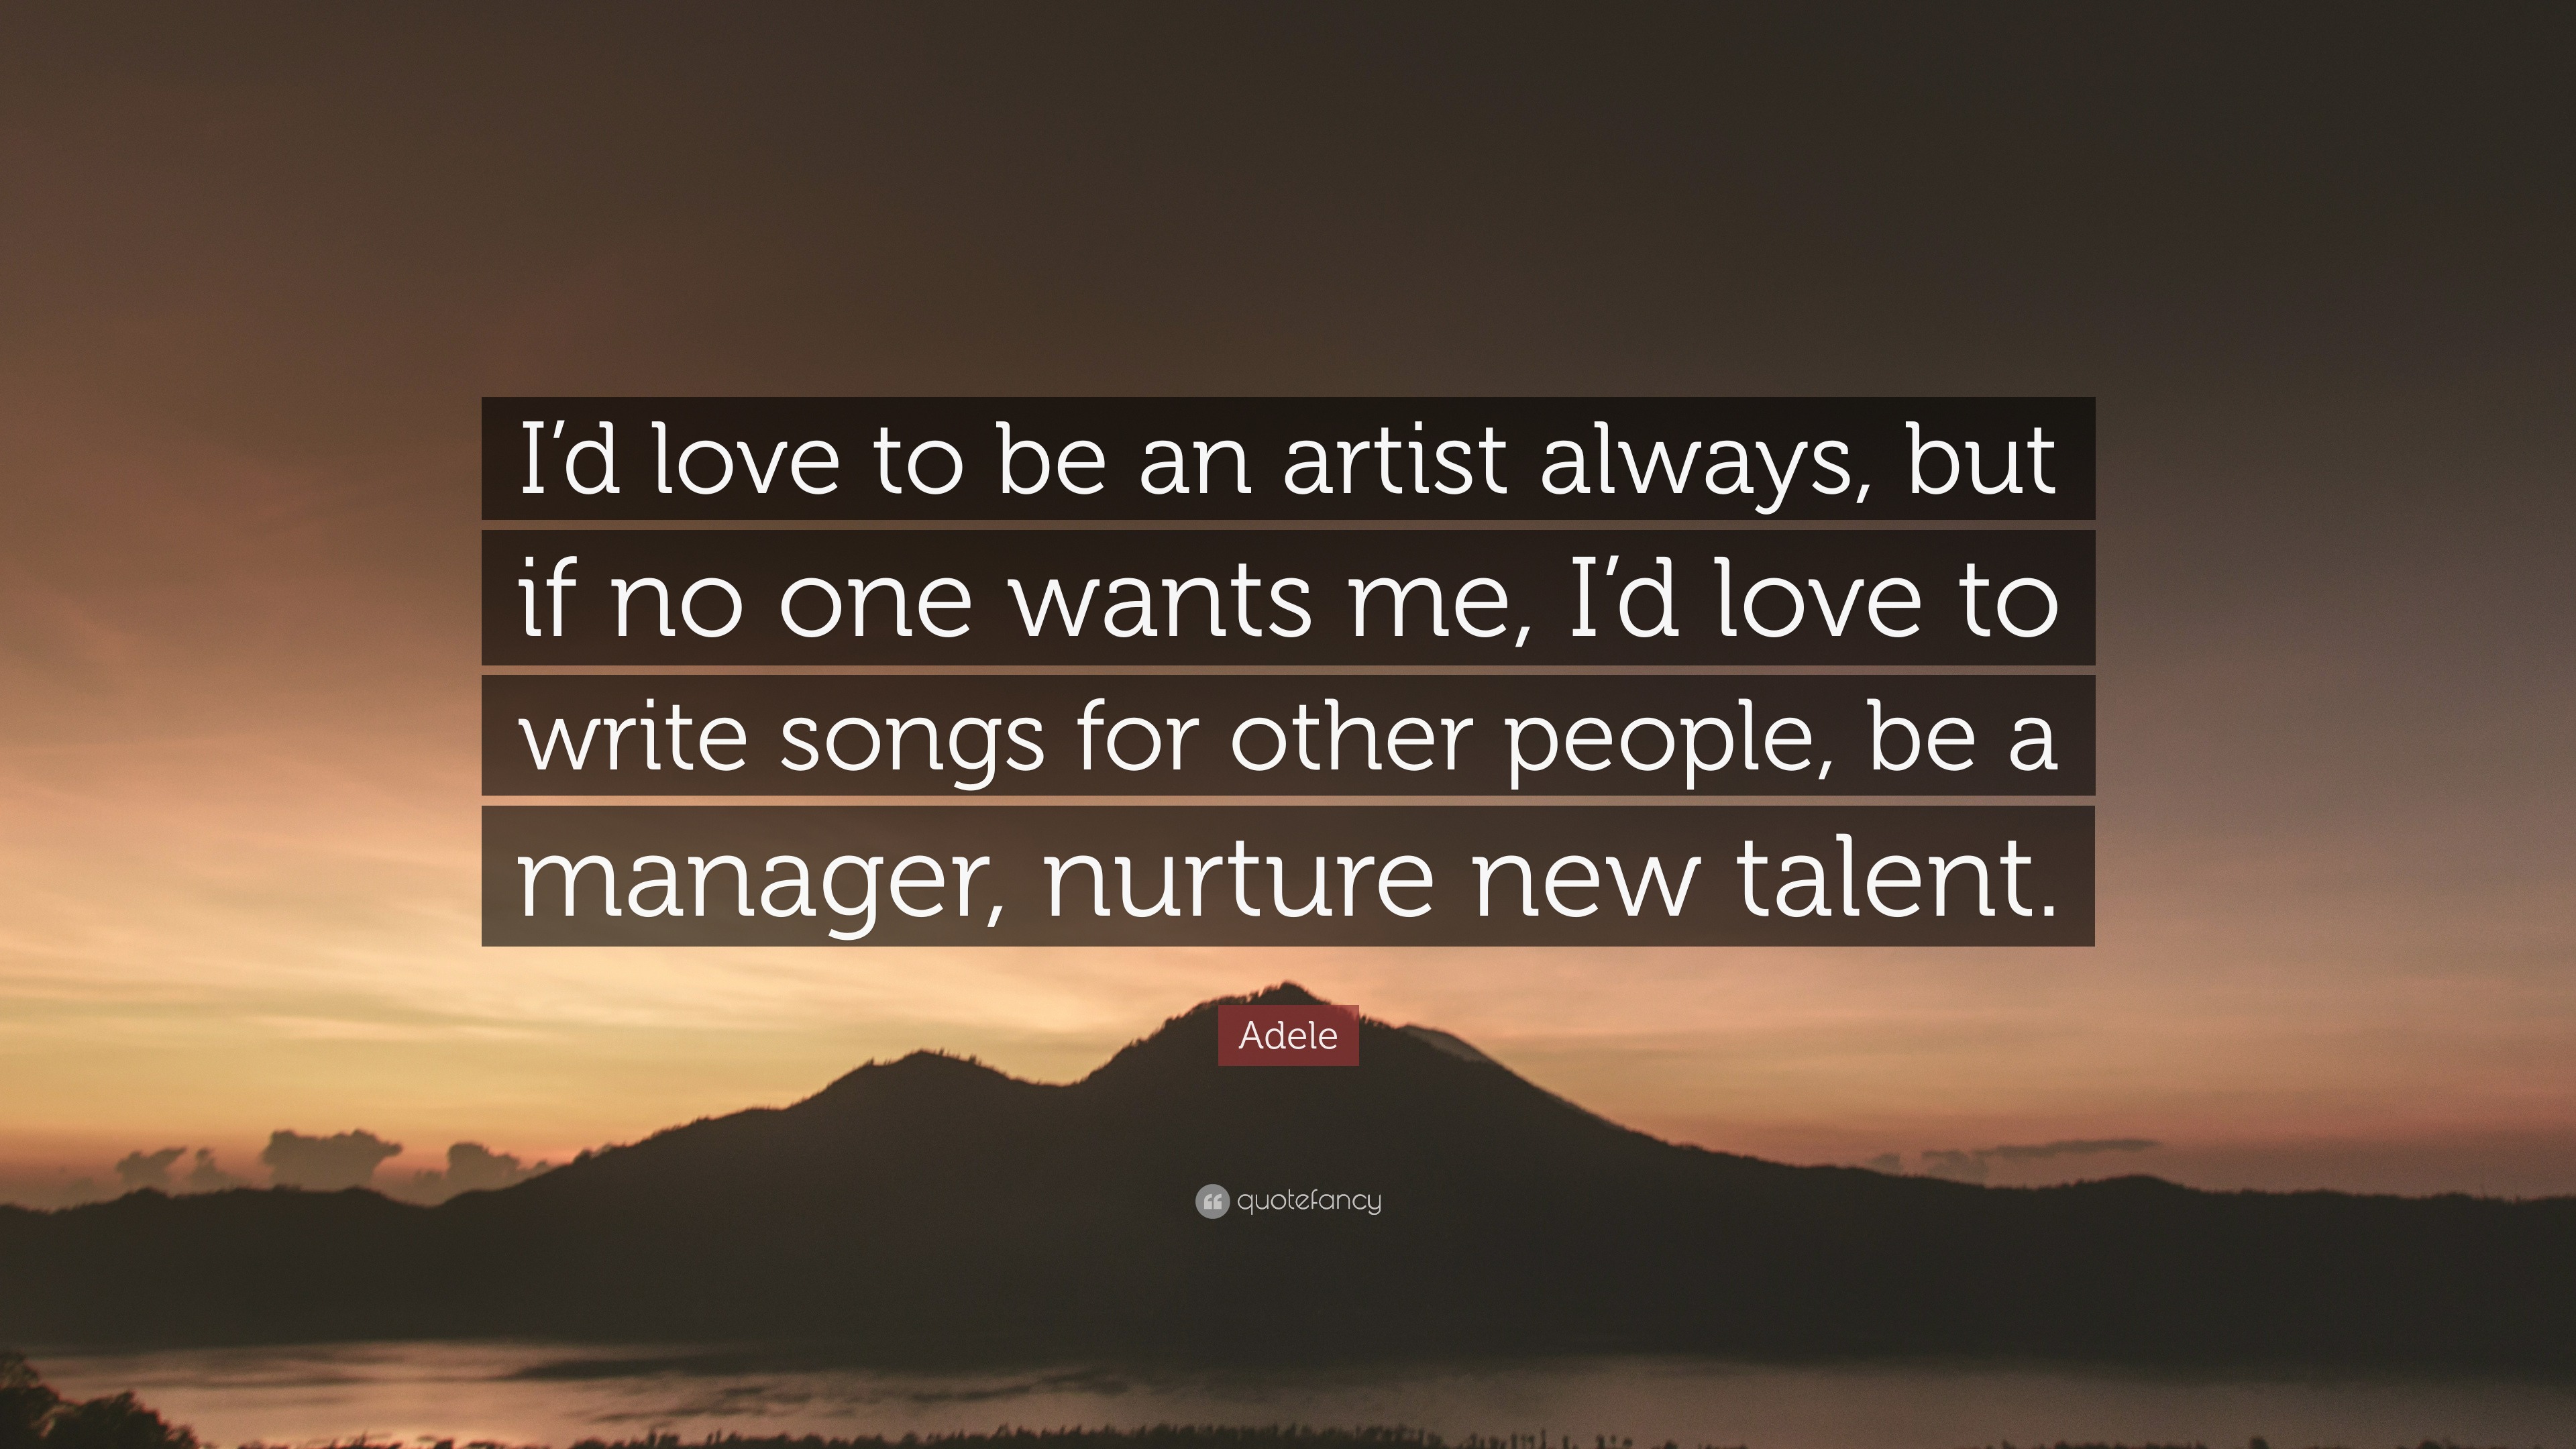 Adele Quote: “I'd love to be an artist always, but if no one wants me, I'd  love to write songs for other people, be a manager, nurture”